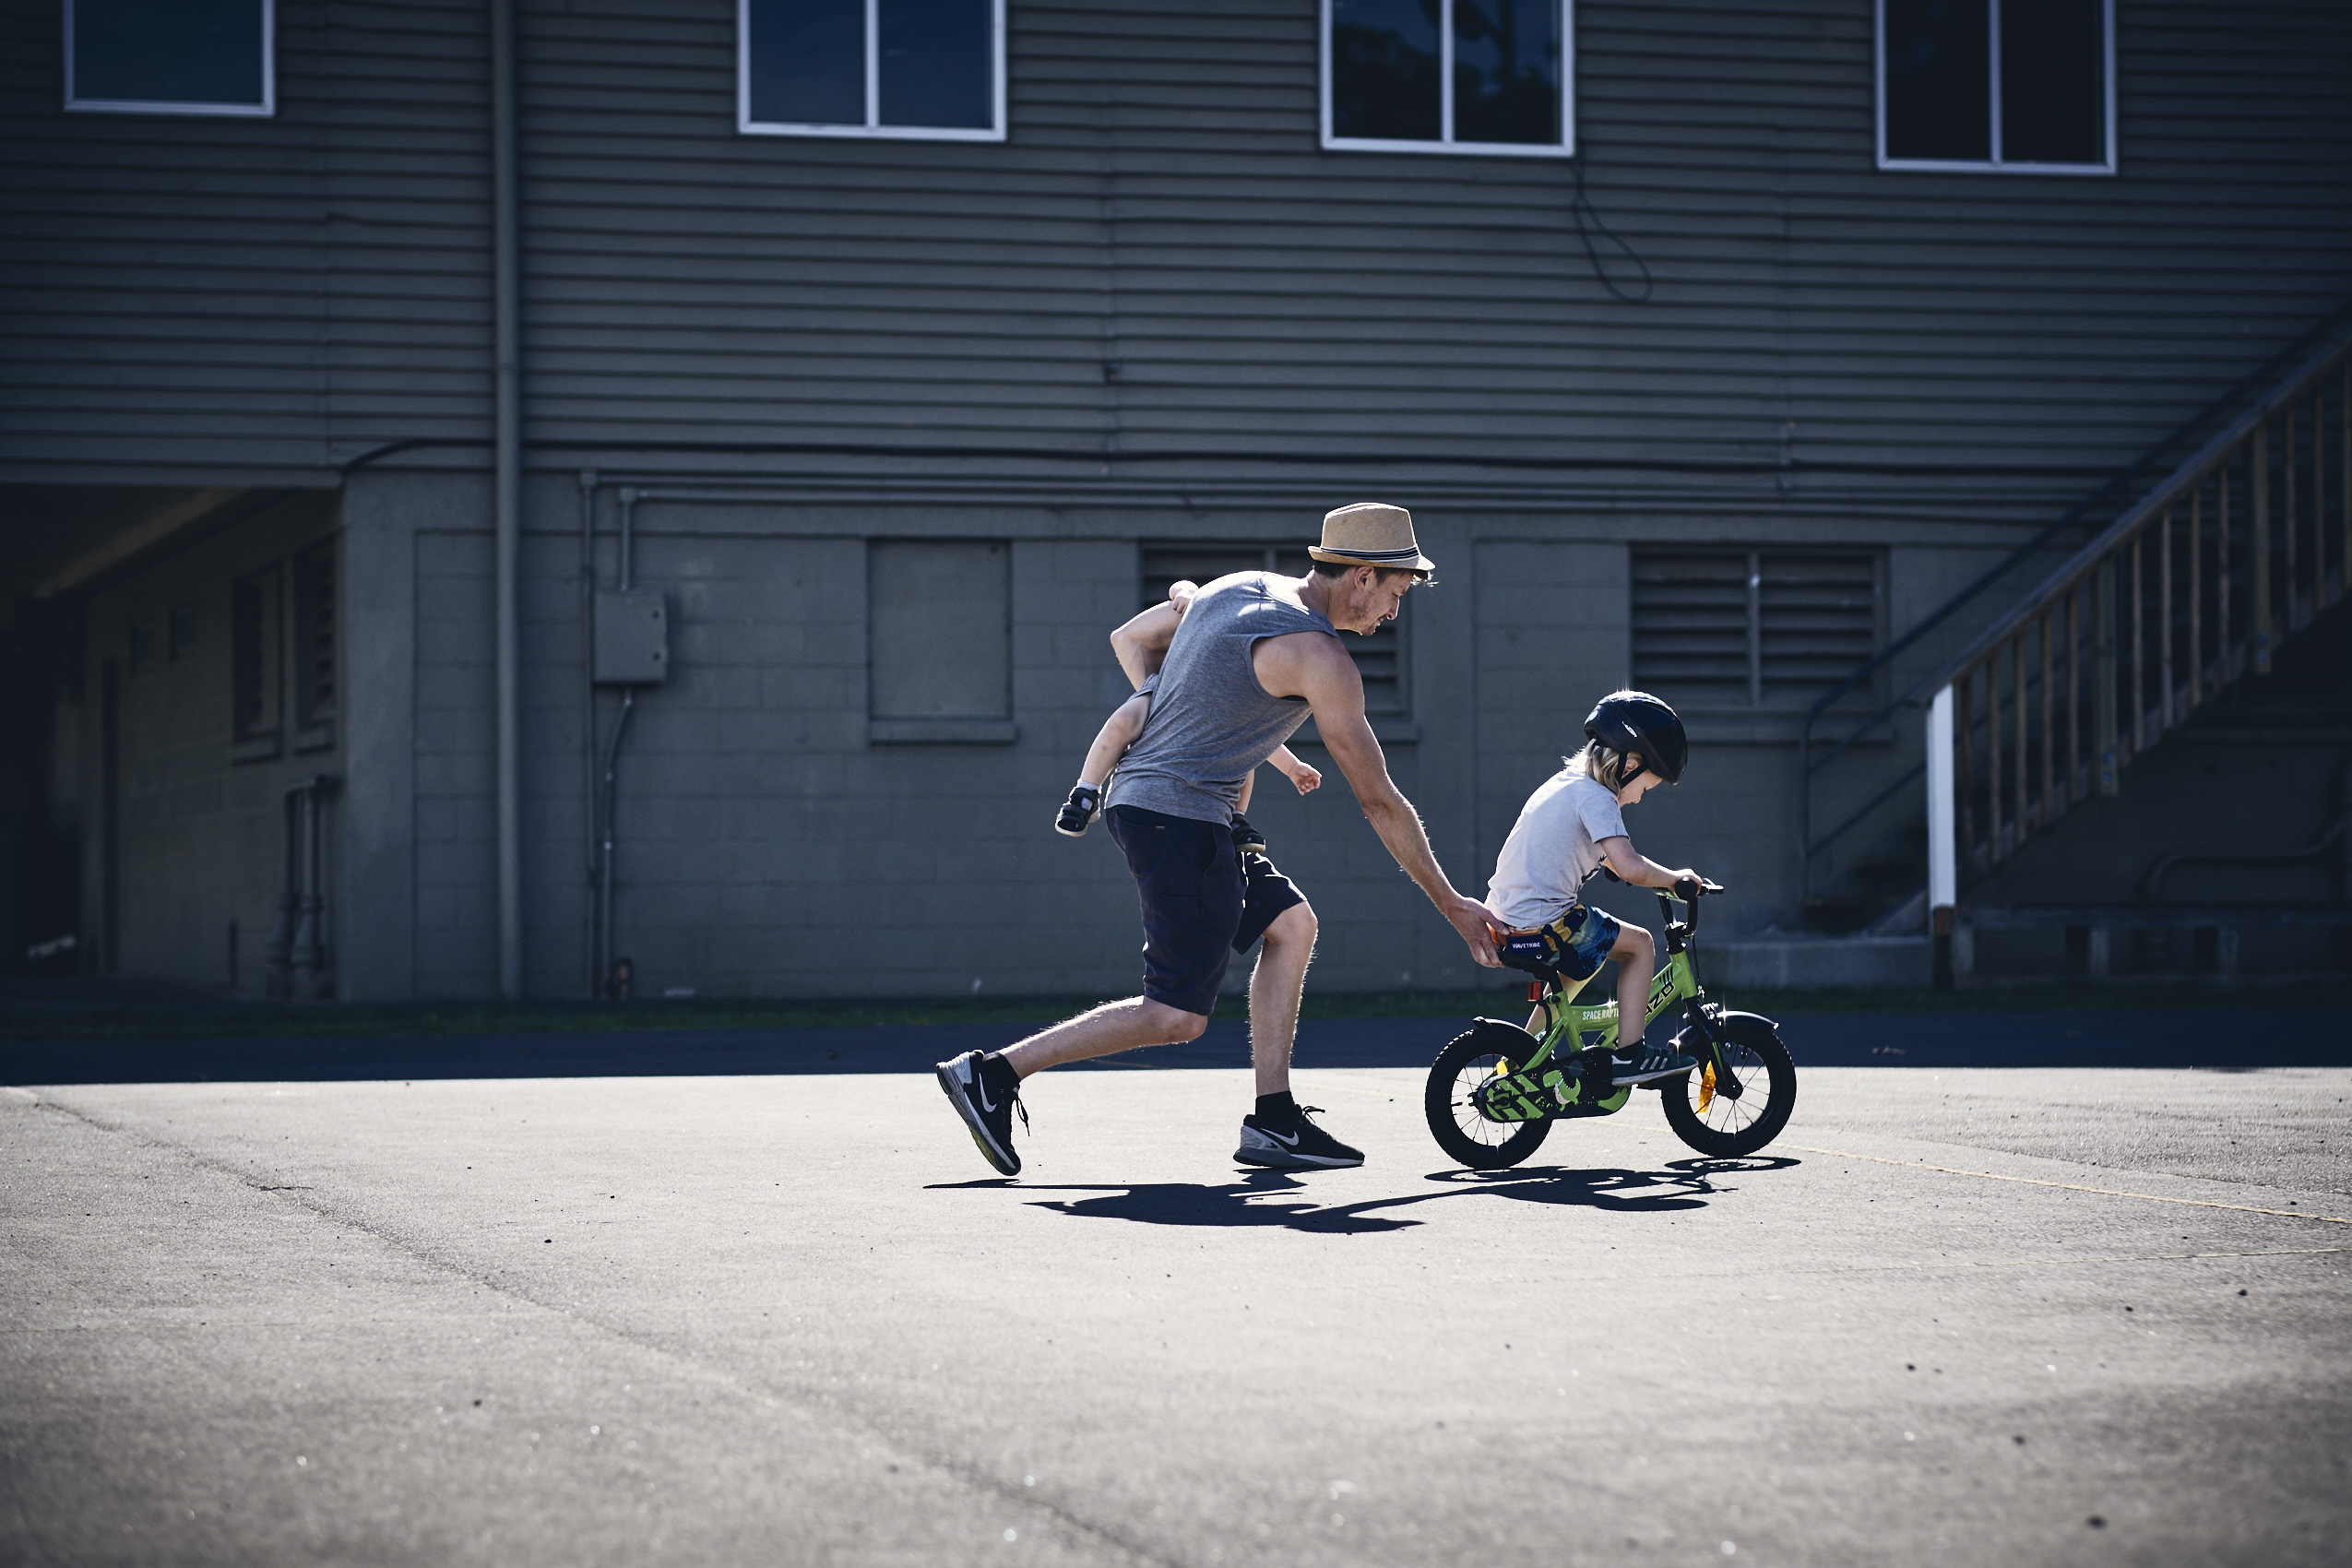 Lockdown • Three Boys Playing with Bikes Outside • Lifestyle & Portrait Photography